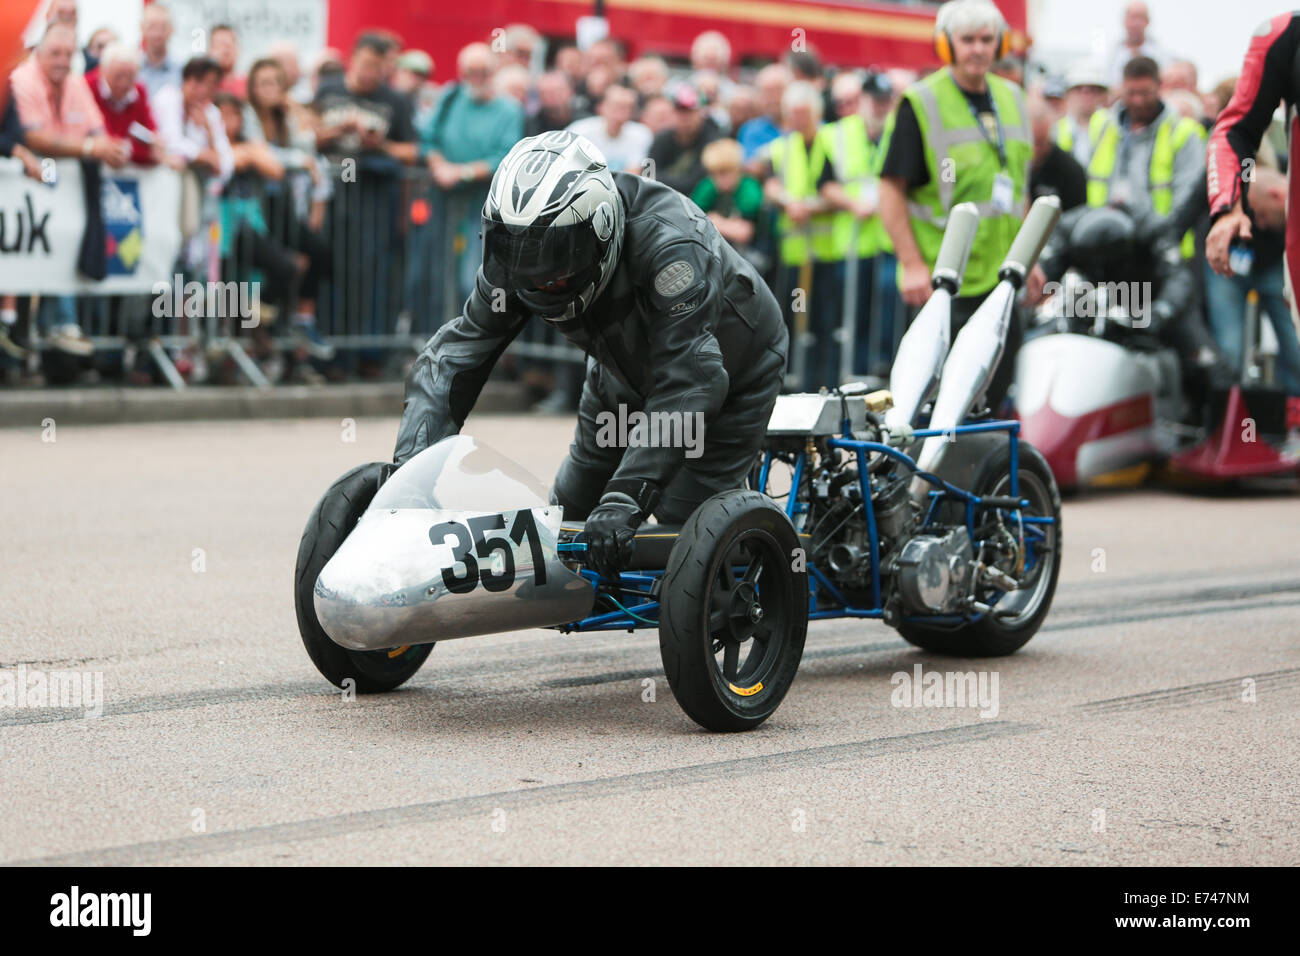 This is Trevor Duckworth riding a Yamaha Custom Trike at the Brighton National Speed Trials organised by the Brighton & Hove Motor Club held annually at Madeira Drive, Brighton Seafront, Brighton, East Sussex, UK Stock Photo